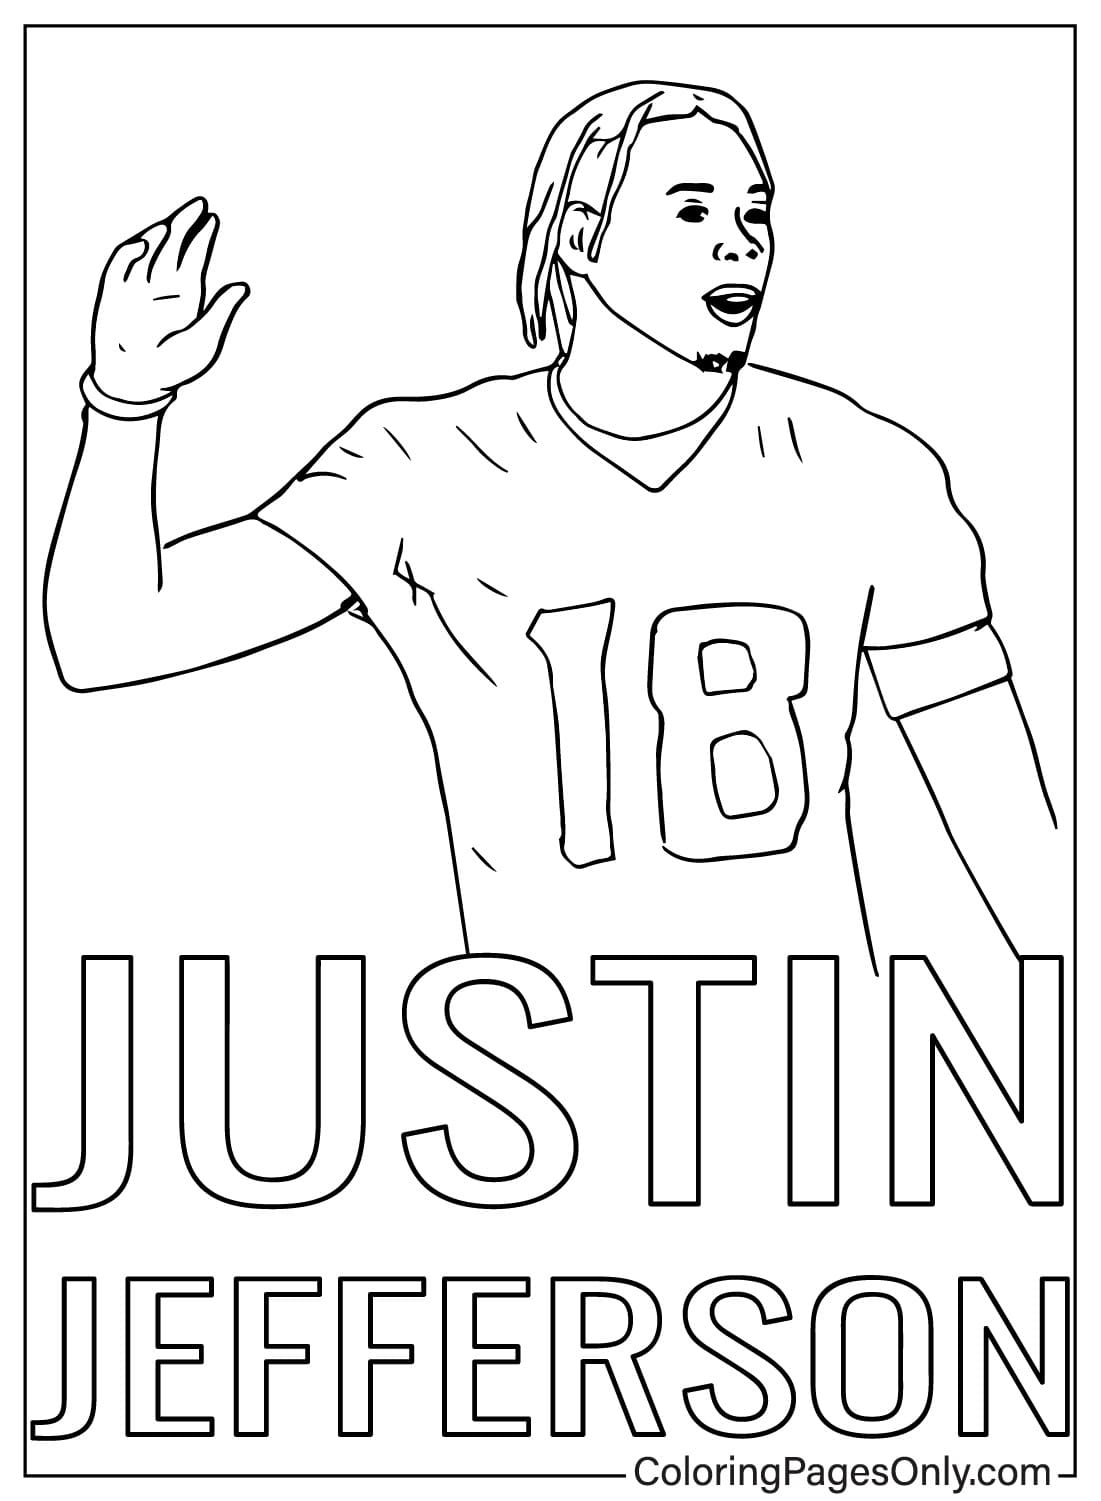 Justin Jefferson Coloring Page to Print from Justin Jefferson